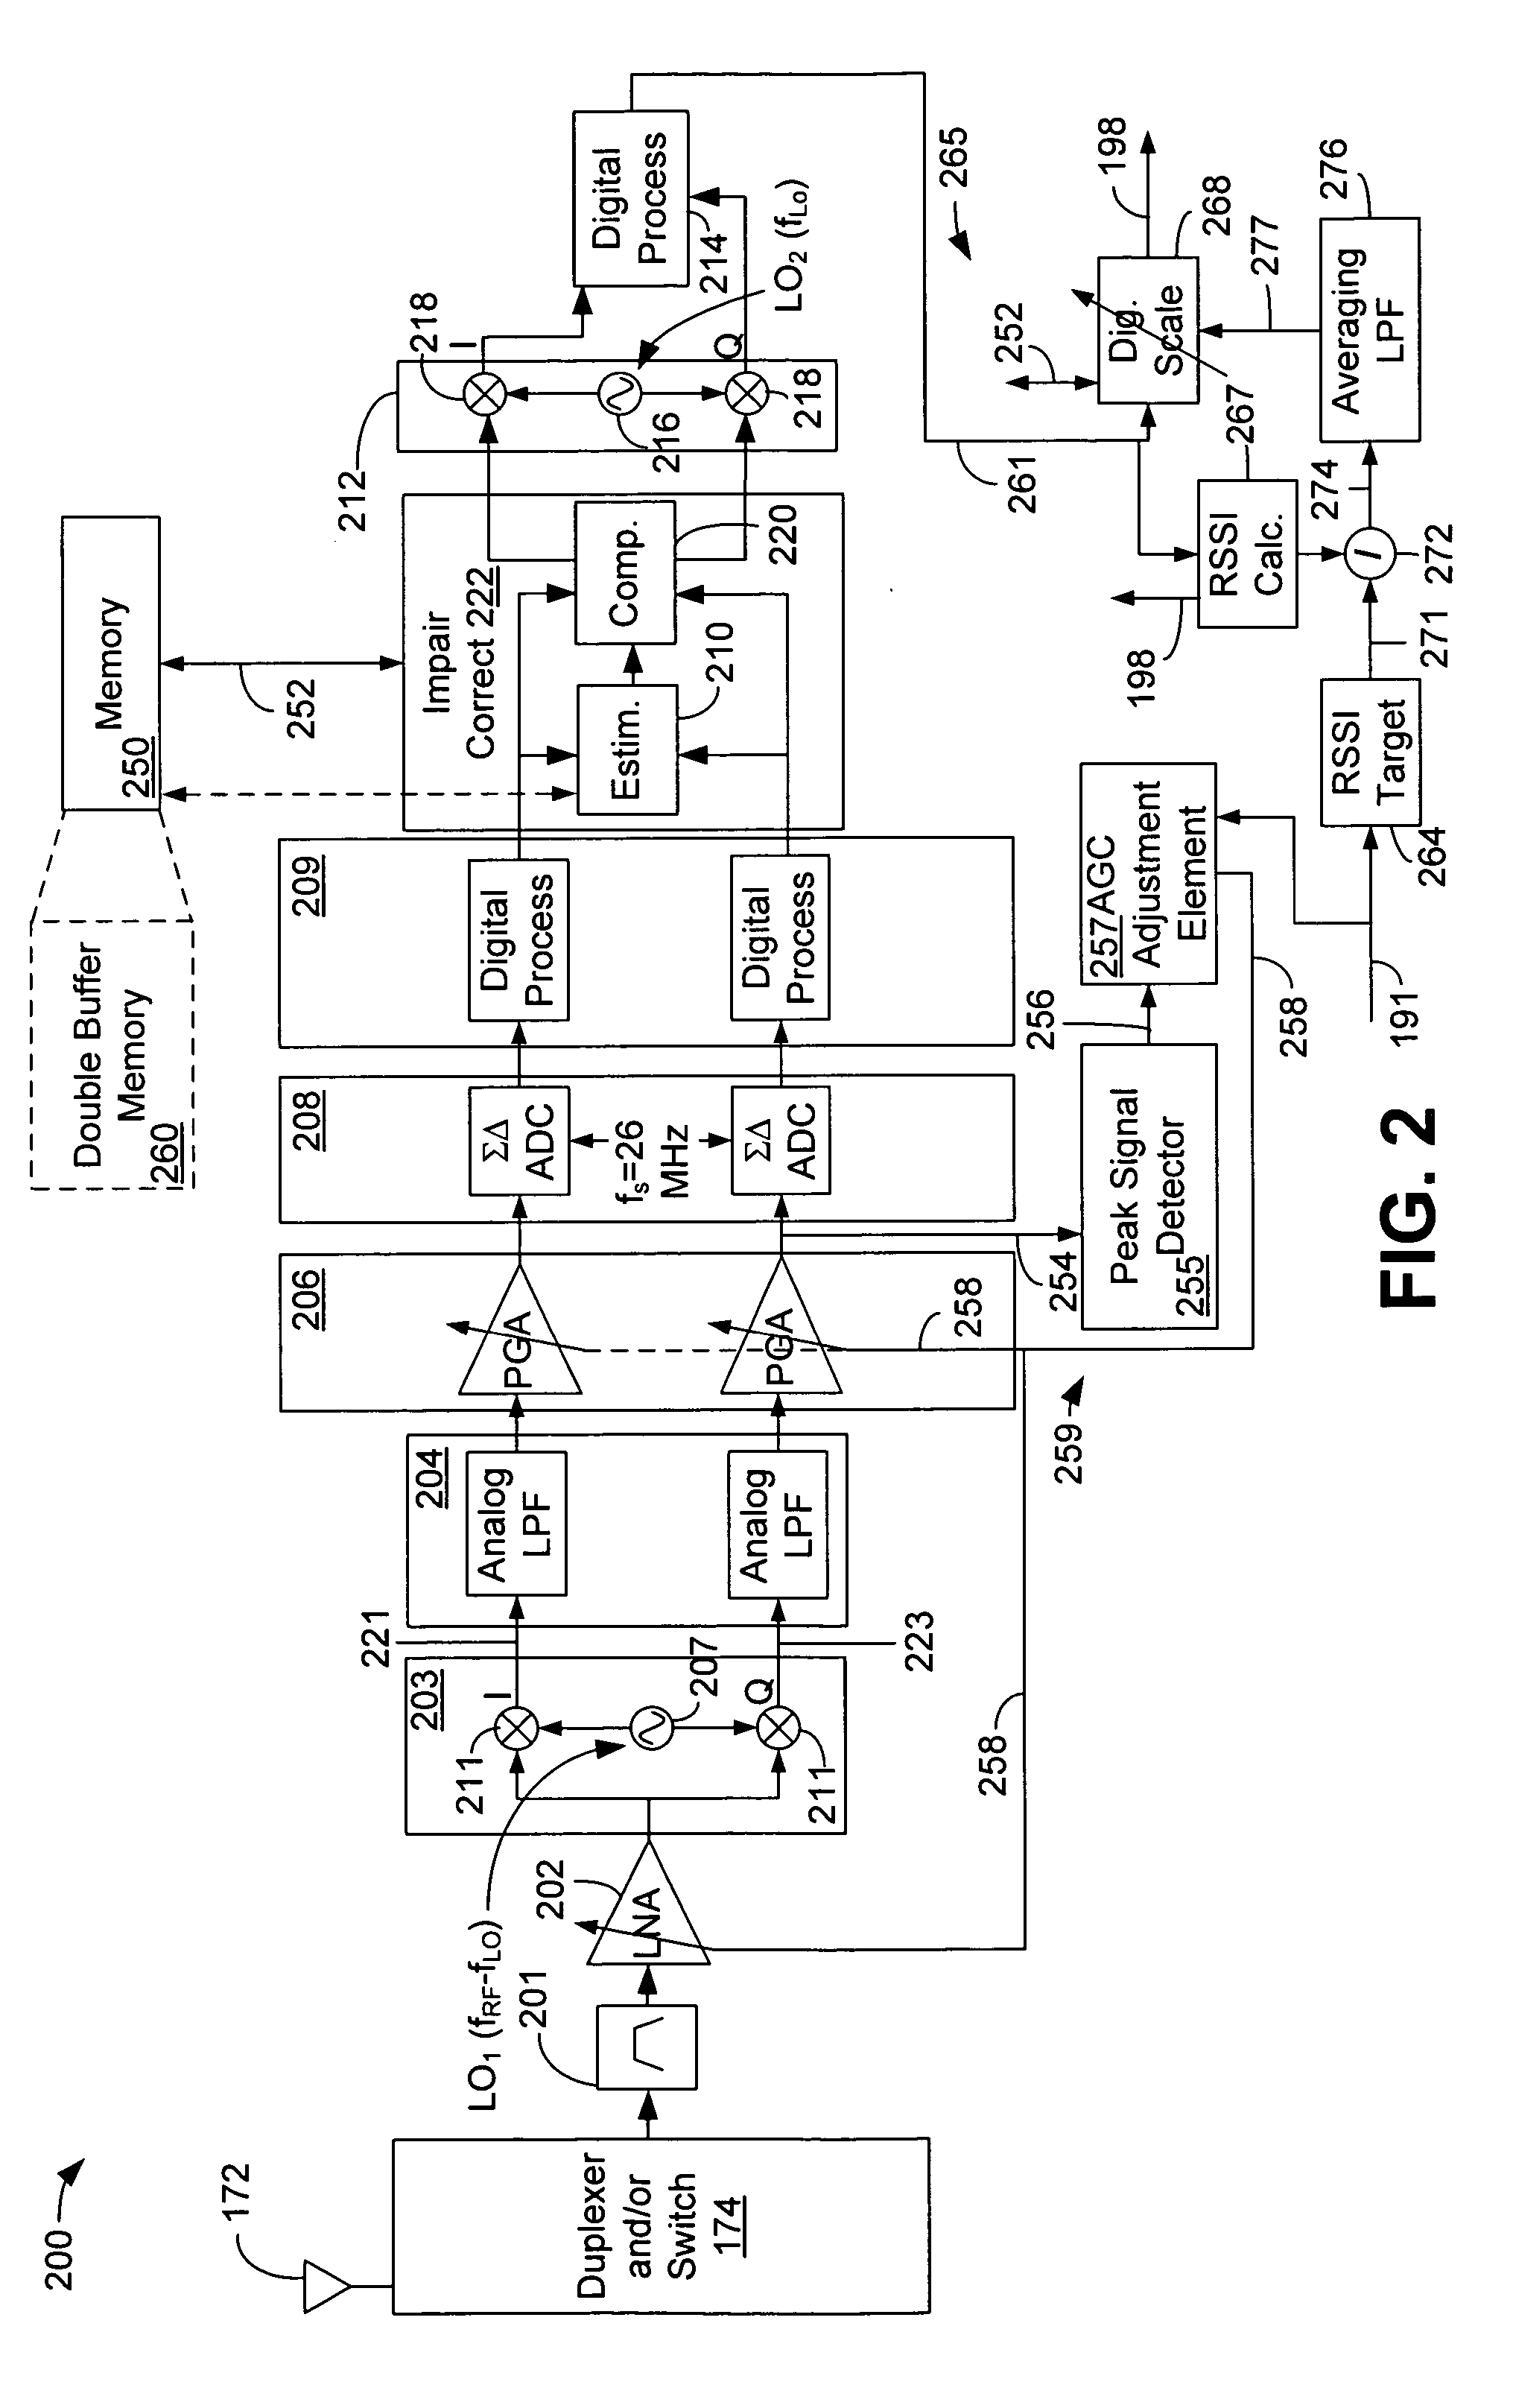 Radio frequency (RF) receiver with double loop integrated fast response automatic gain control (AGC)